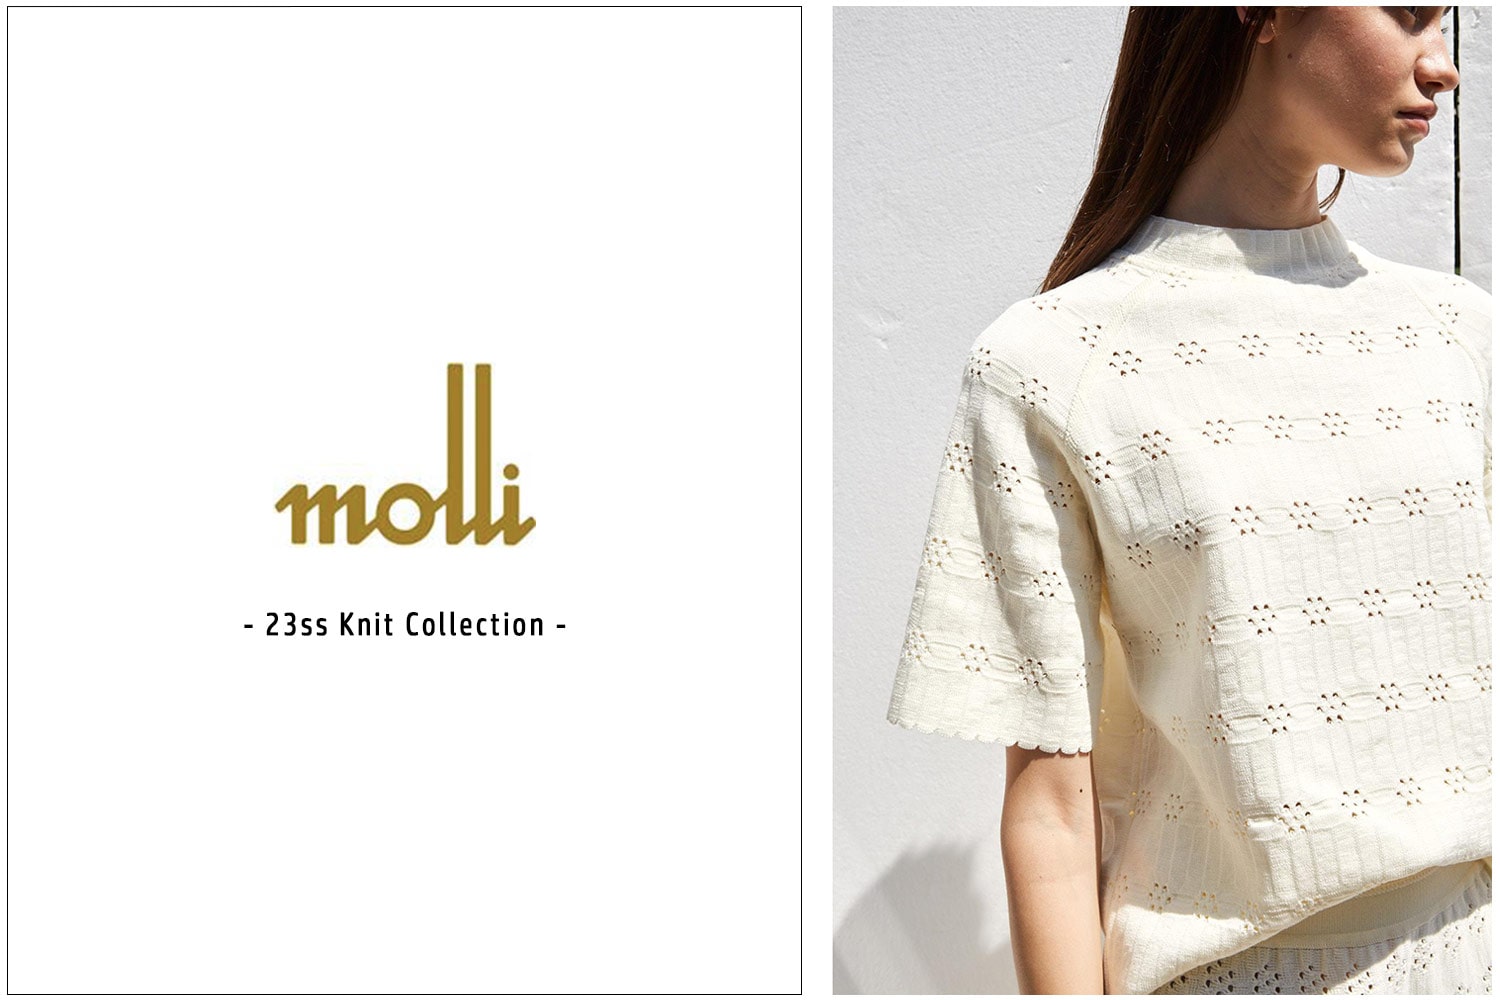 molli - knit collection